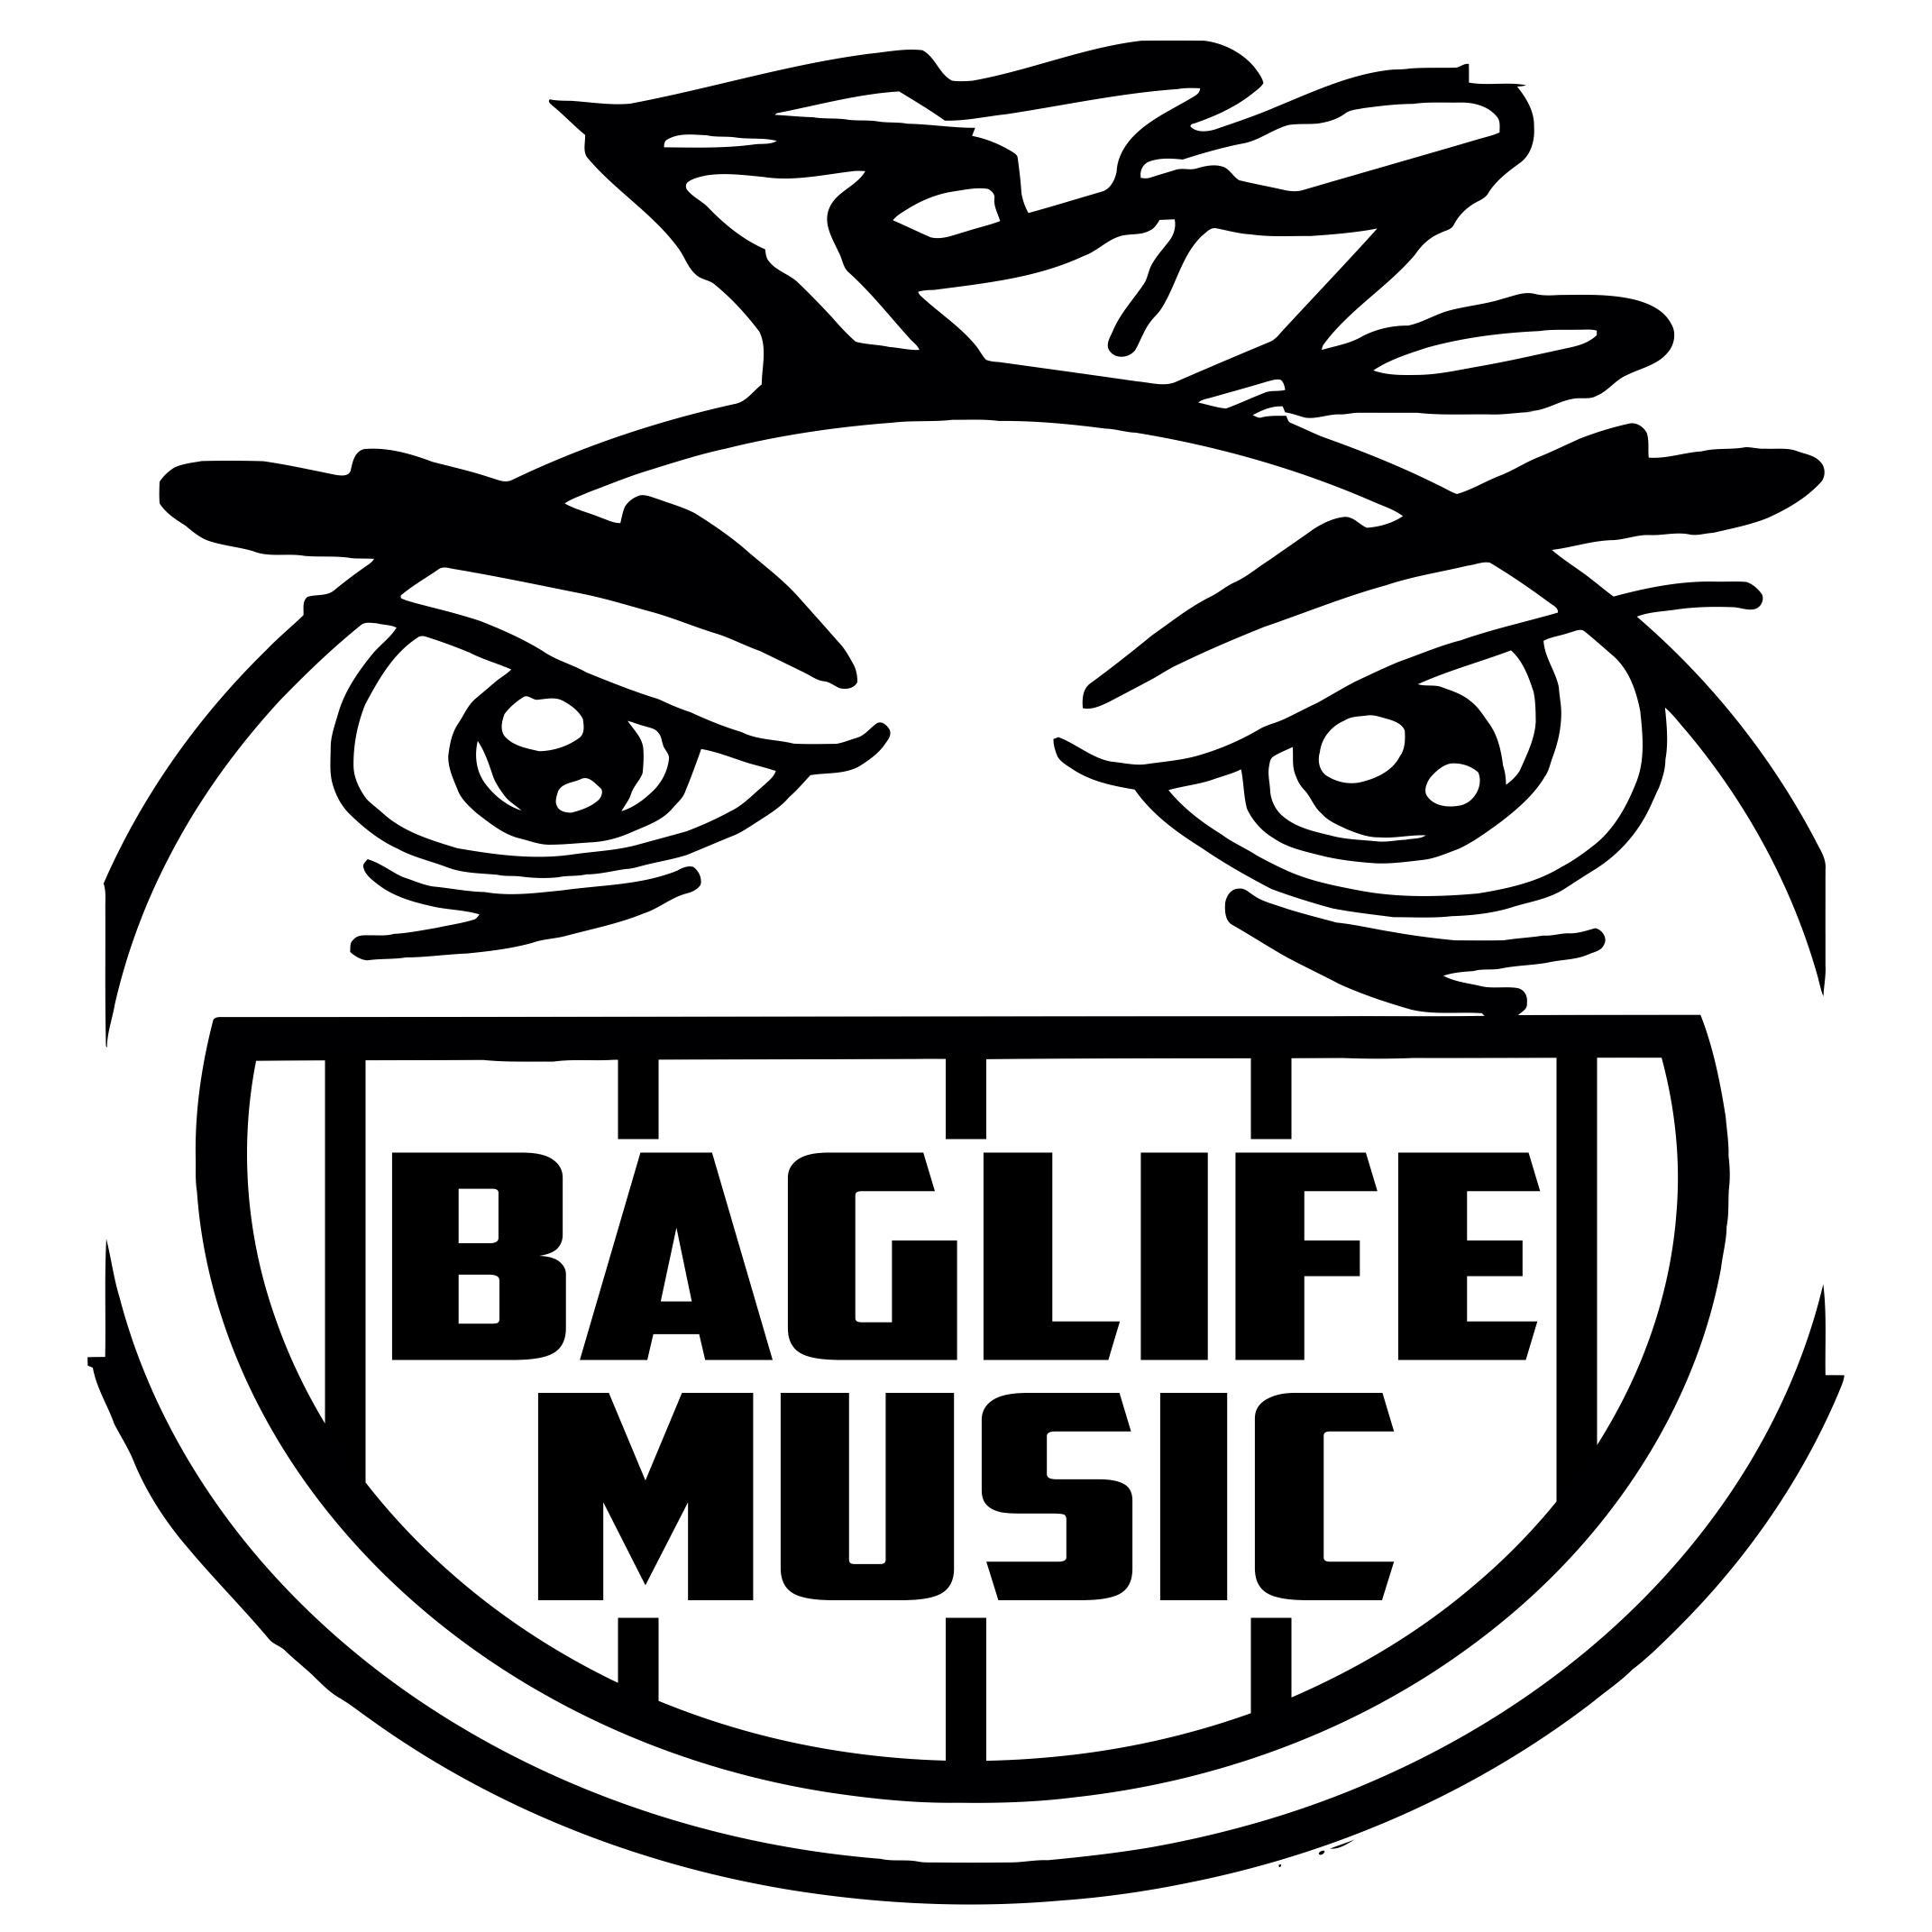 President of A&R BagLife | IMF Ultimate Juggalo
Contact us at: 
http://t.co/dBYgstU2qg